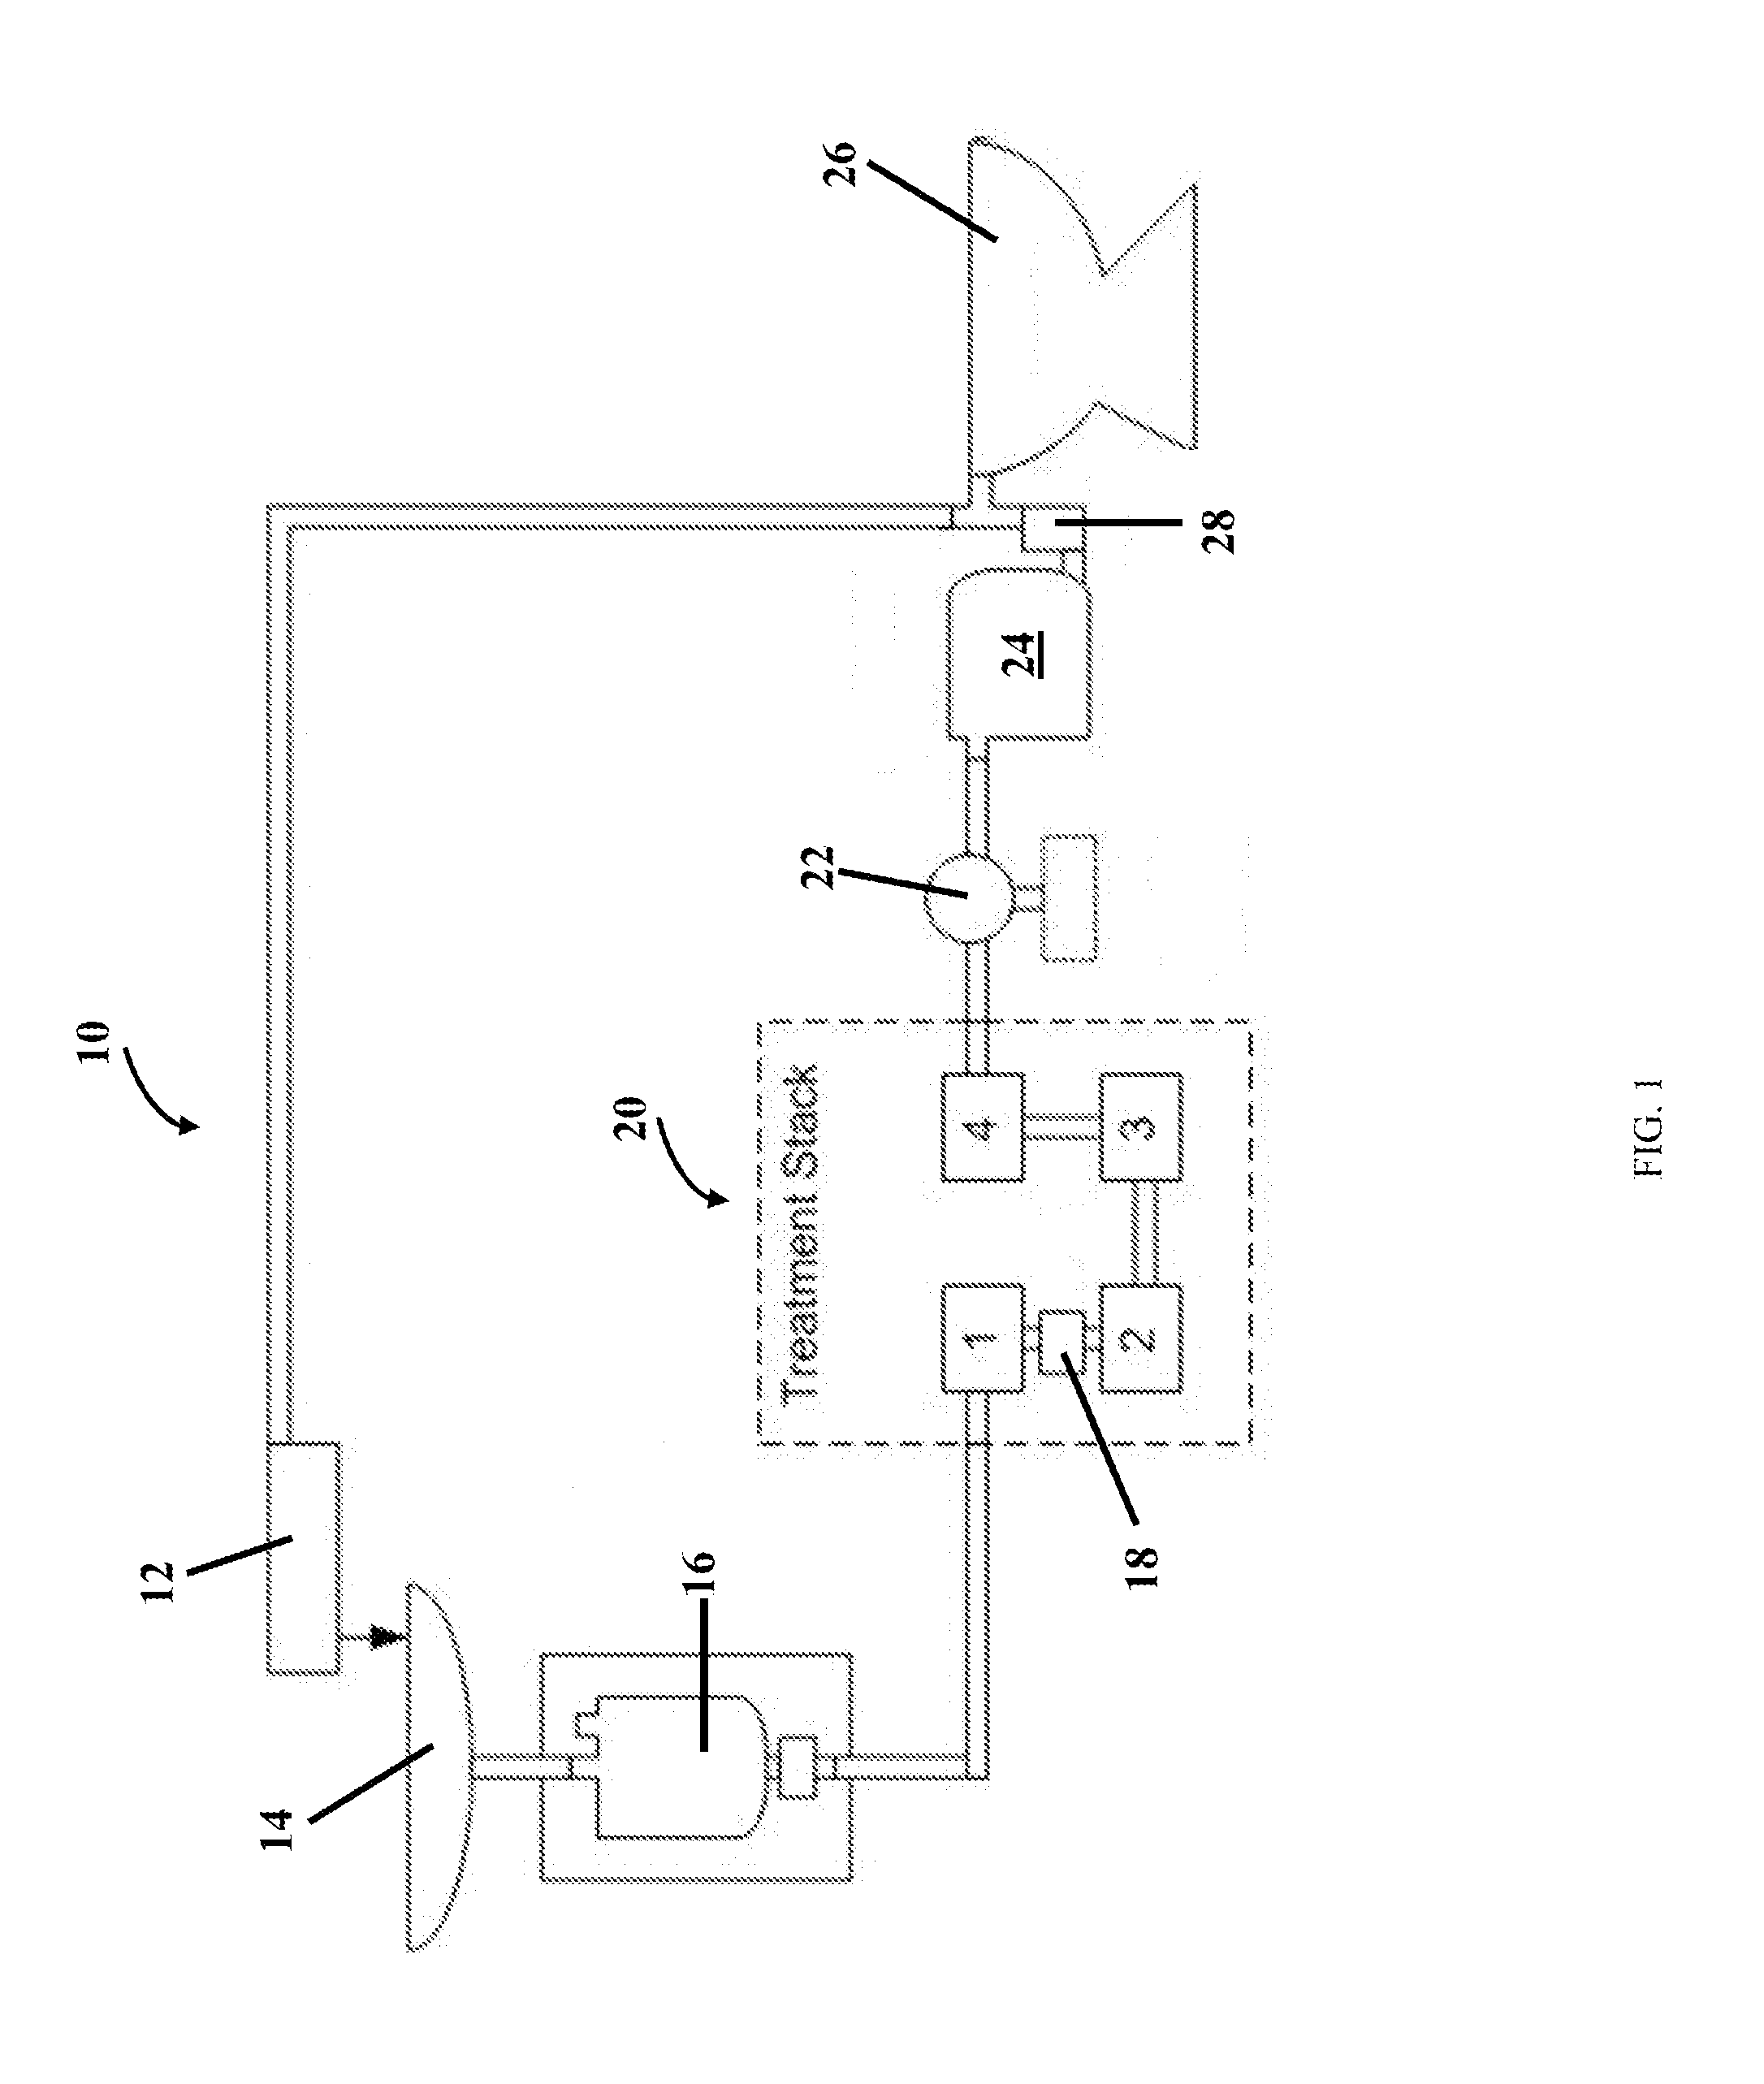 Systems and Methods for Treating Grey Water On-Board Passenger Transport Vehicles